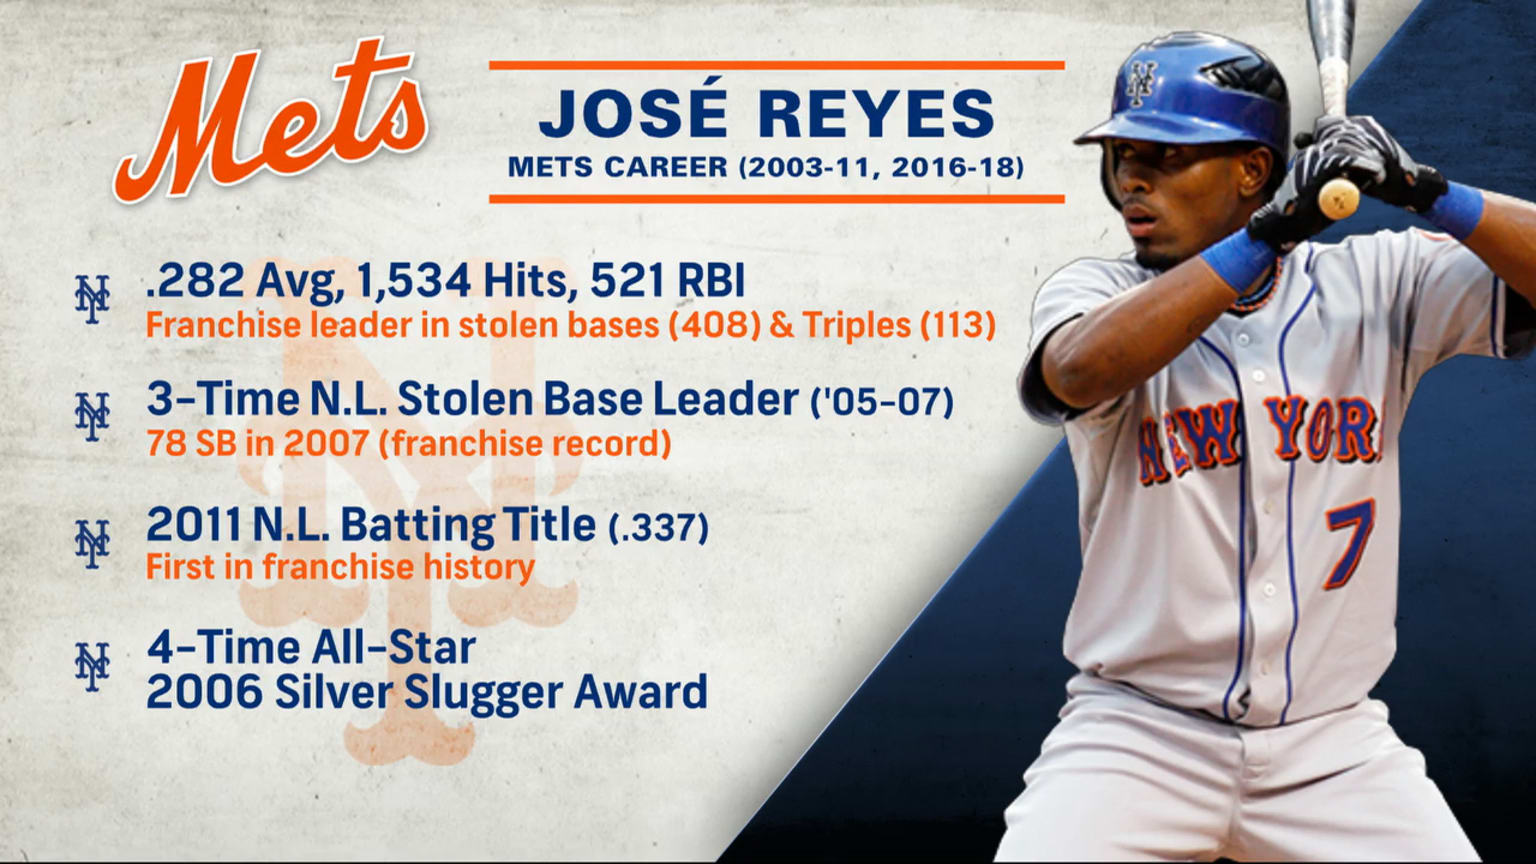 Jose Reyes announces retirement from MLB after 16 seasons